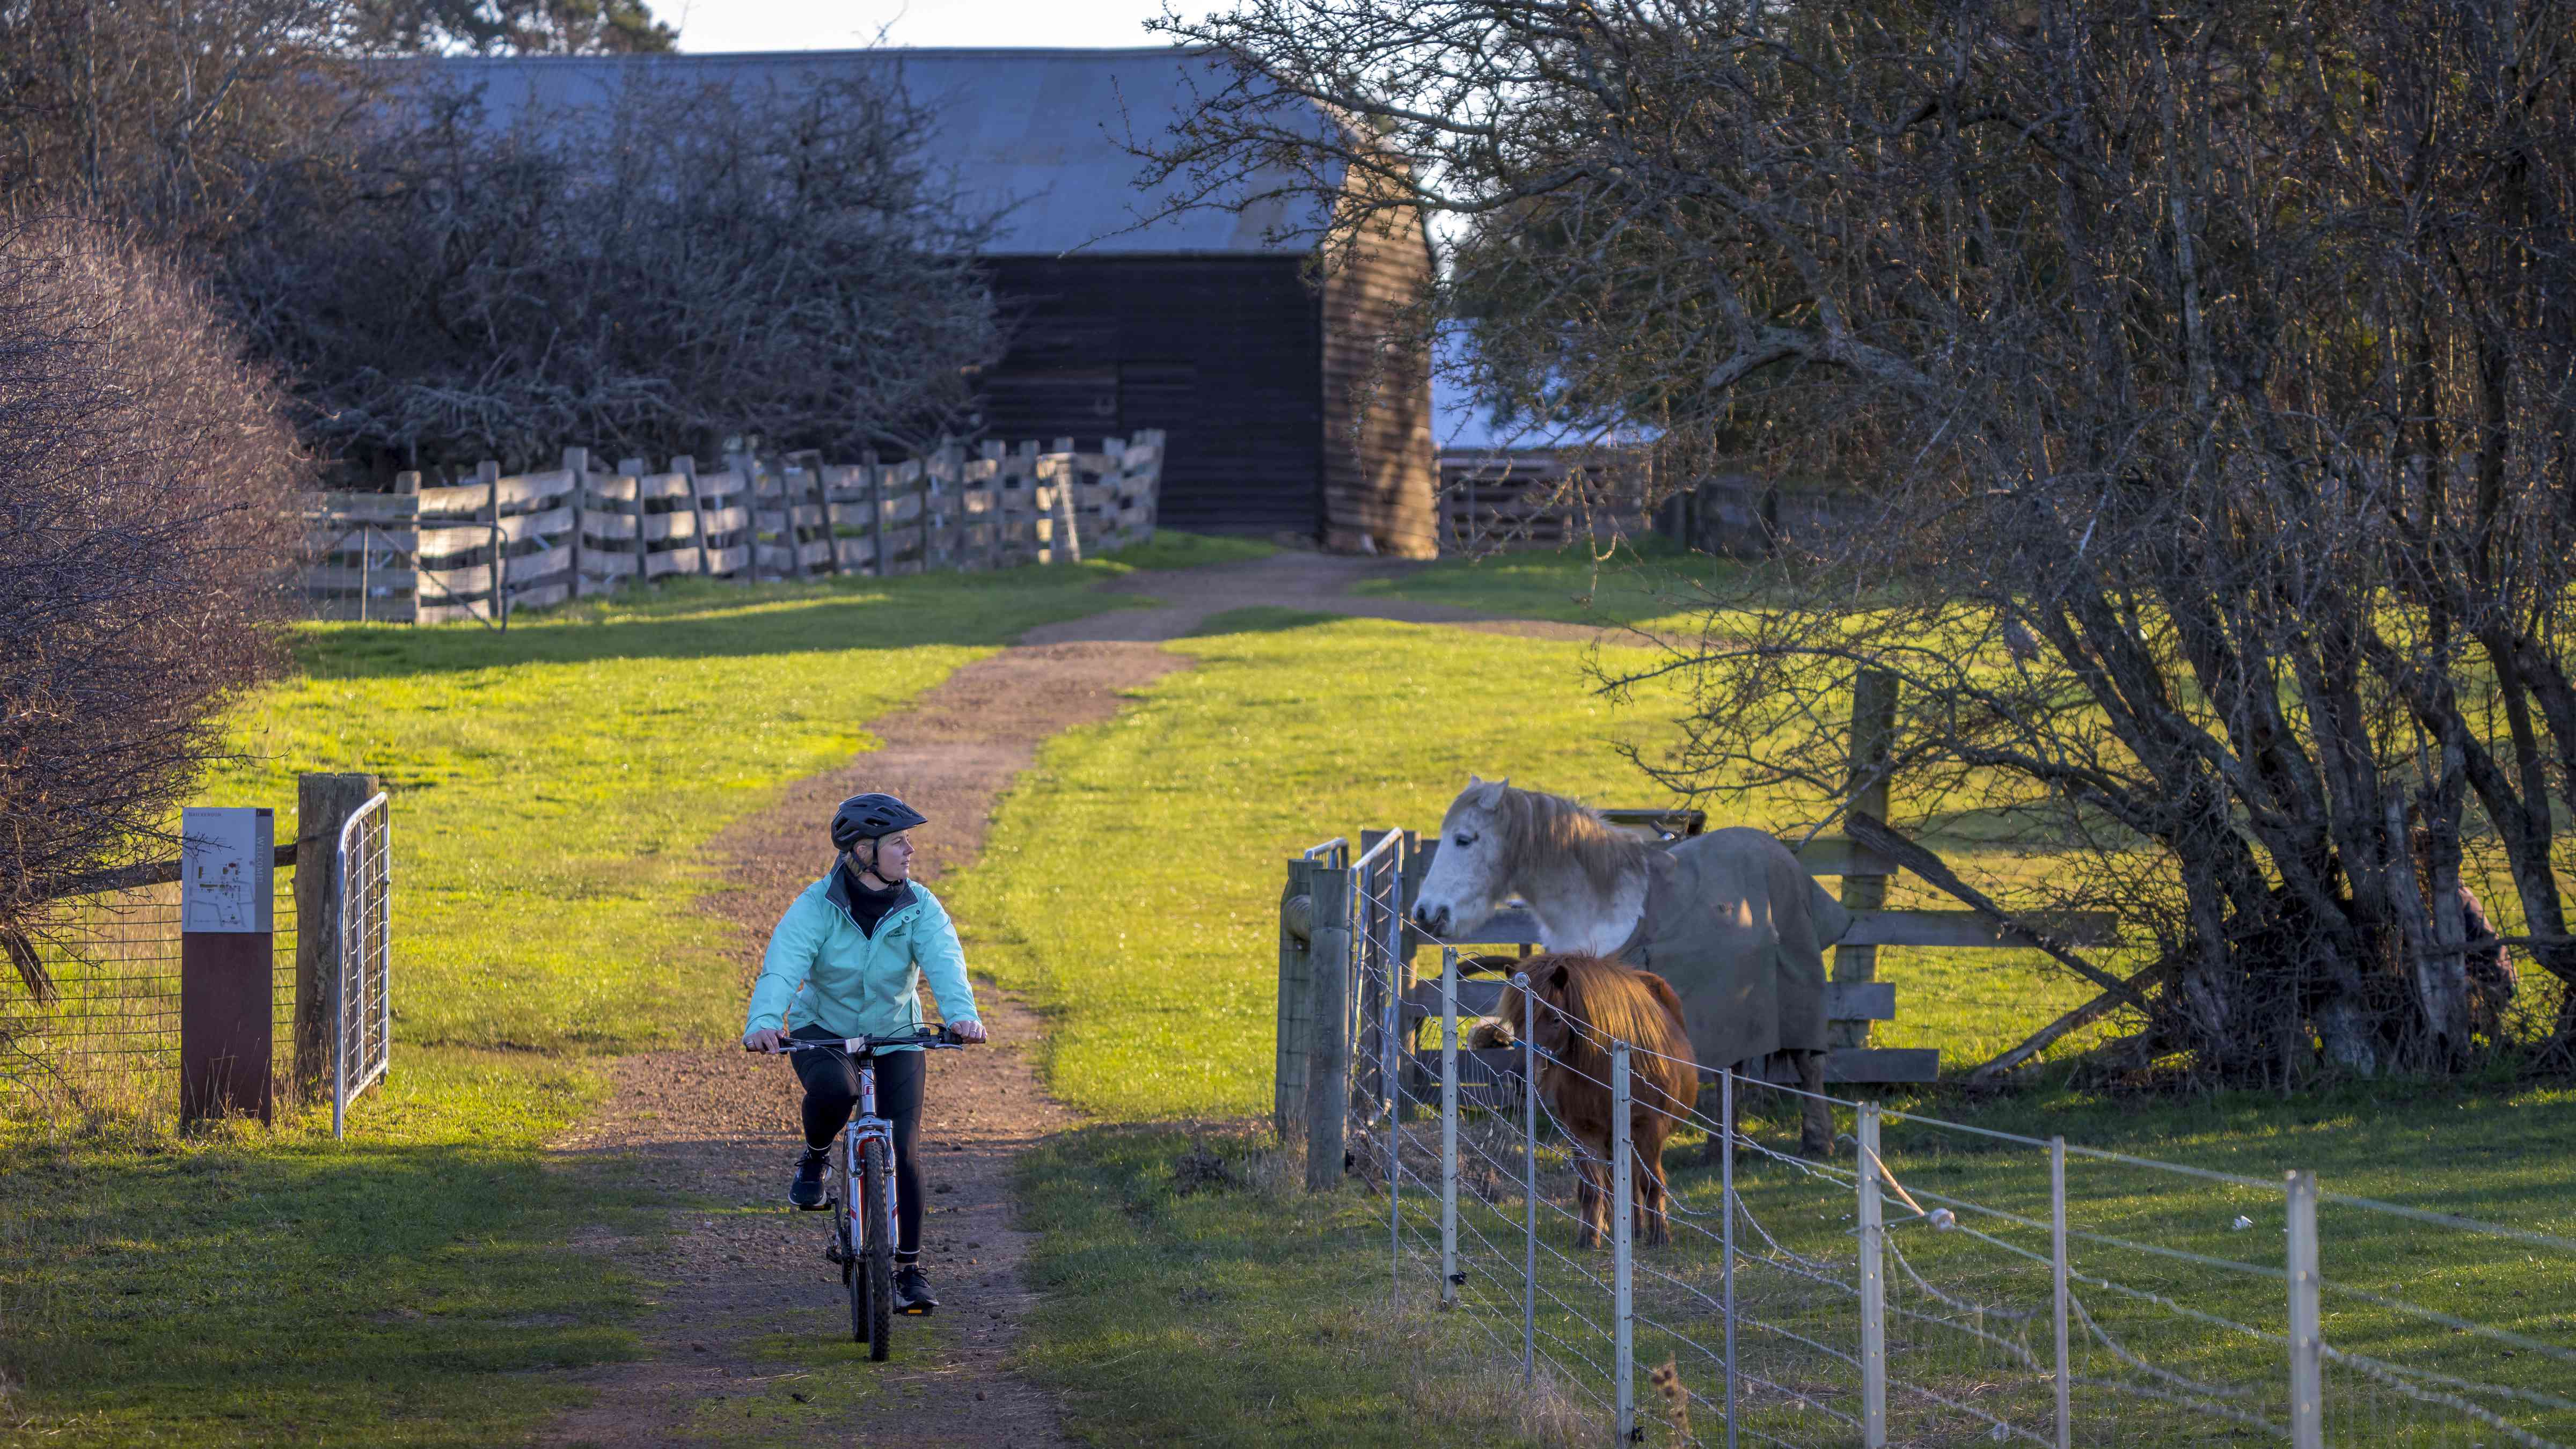 A cyclist rides down the Convict Trail past a white horse and brown pony in the paddock to the right. The shearing shed and sheeps yards are in the background. Photo: Rob Burnett.